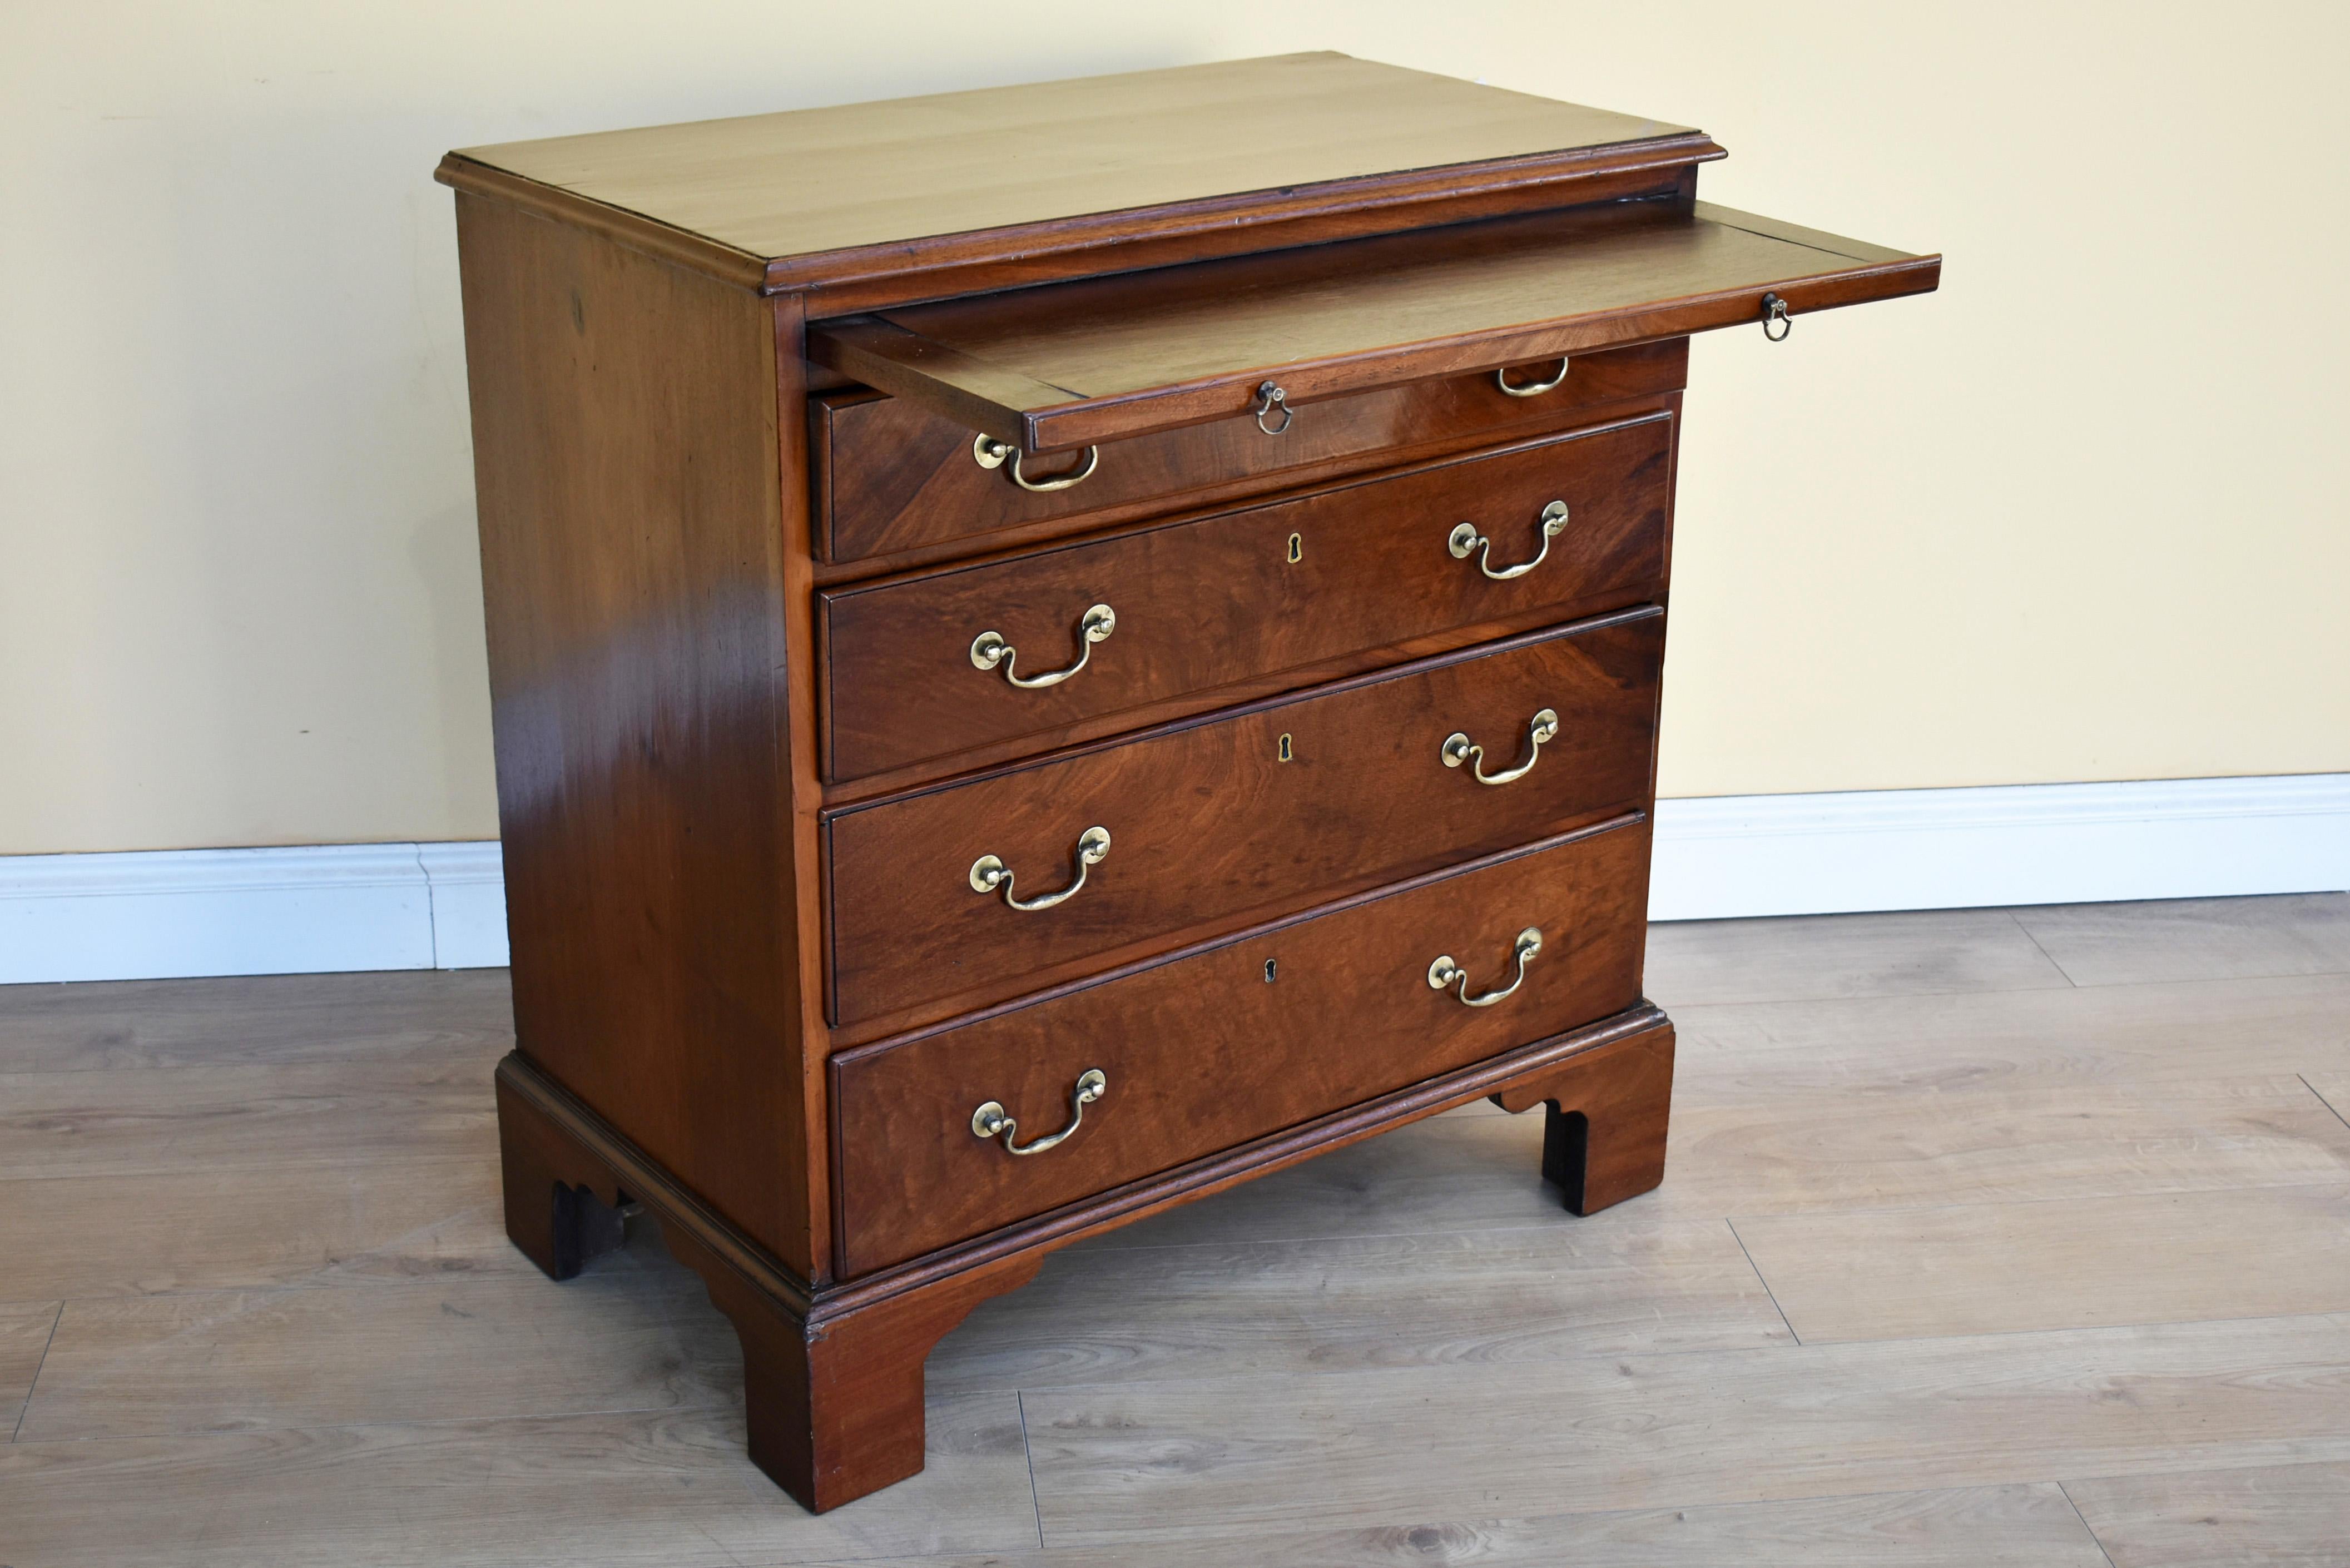 For sale is a good quality George III Mahogany chest of drawers. The top of the chest has a brushing slide over four graduated drawers, each with brass handles and escutcheons. The chest stands on bracket feet and is in very good condition having